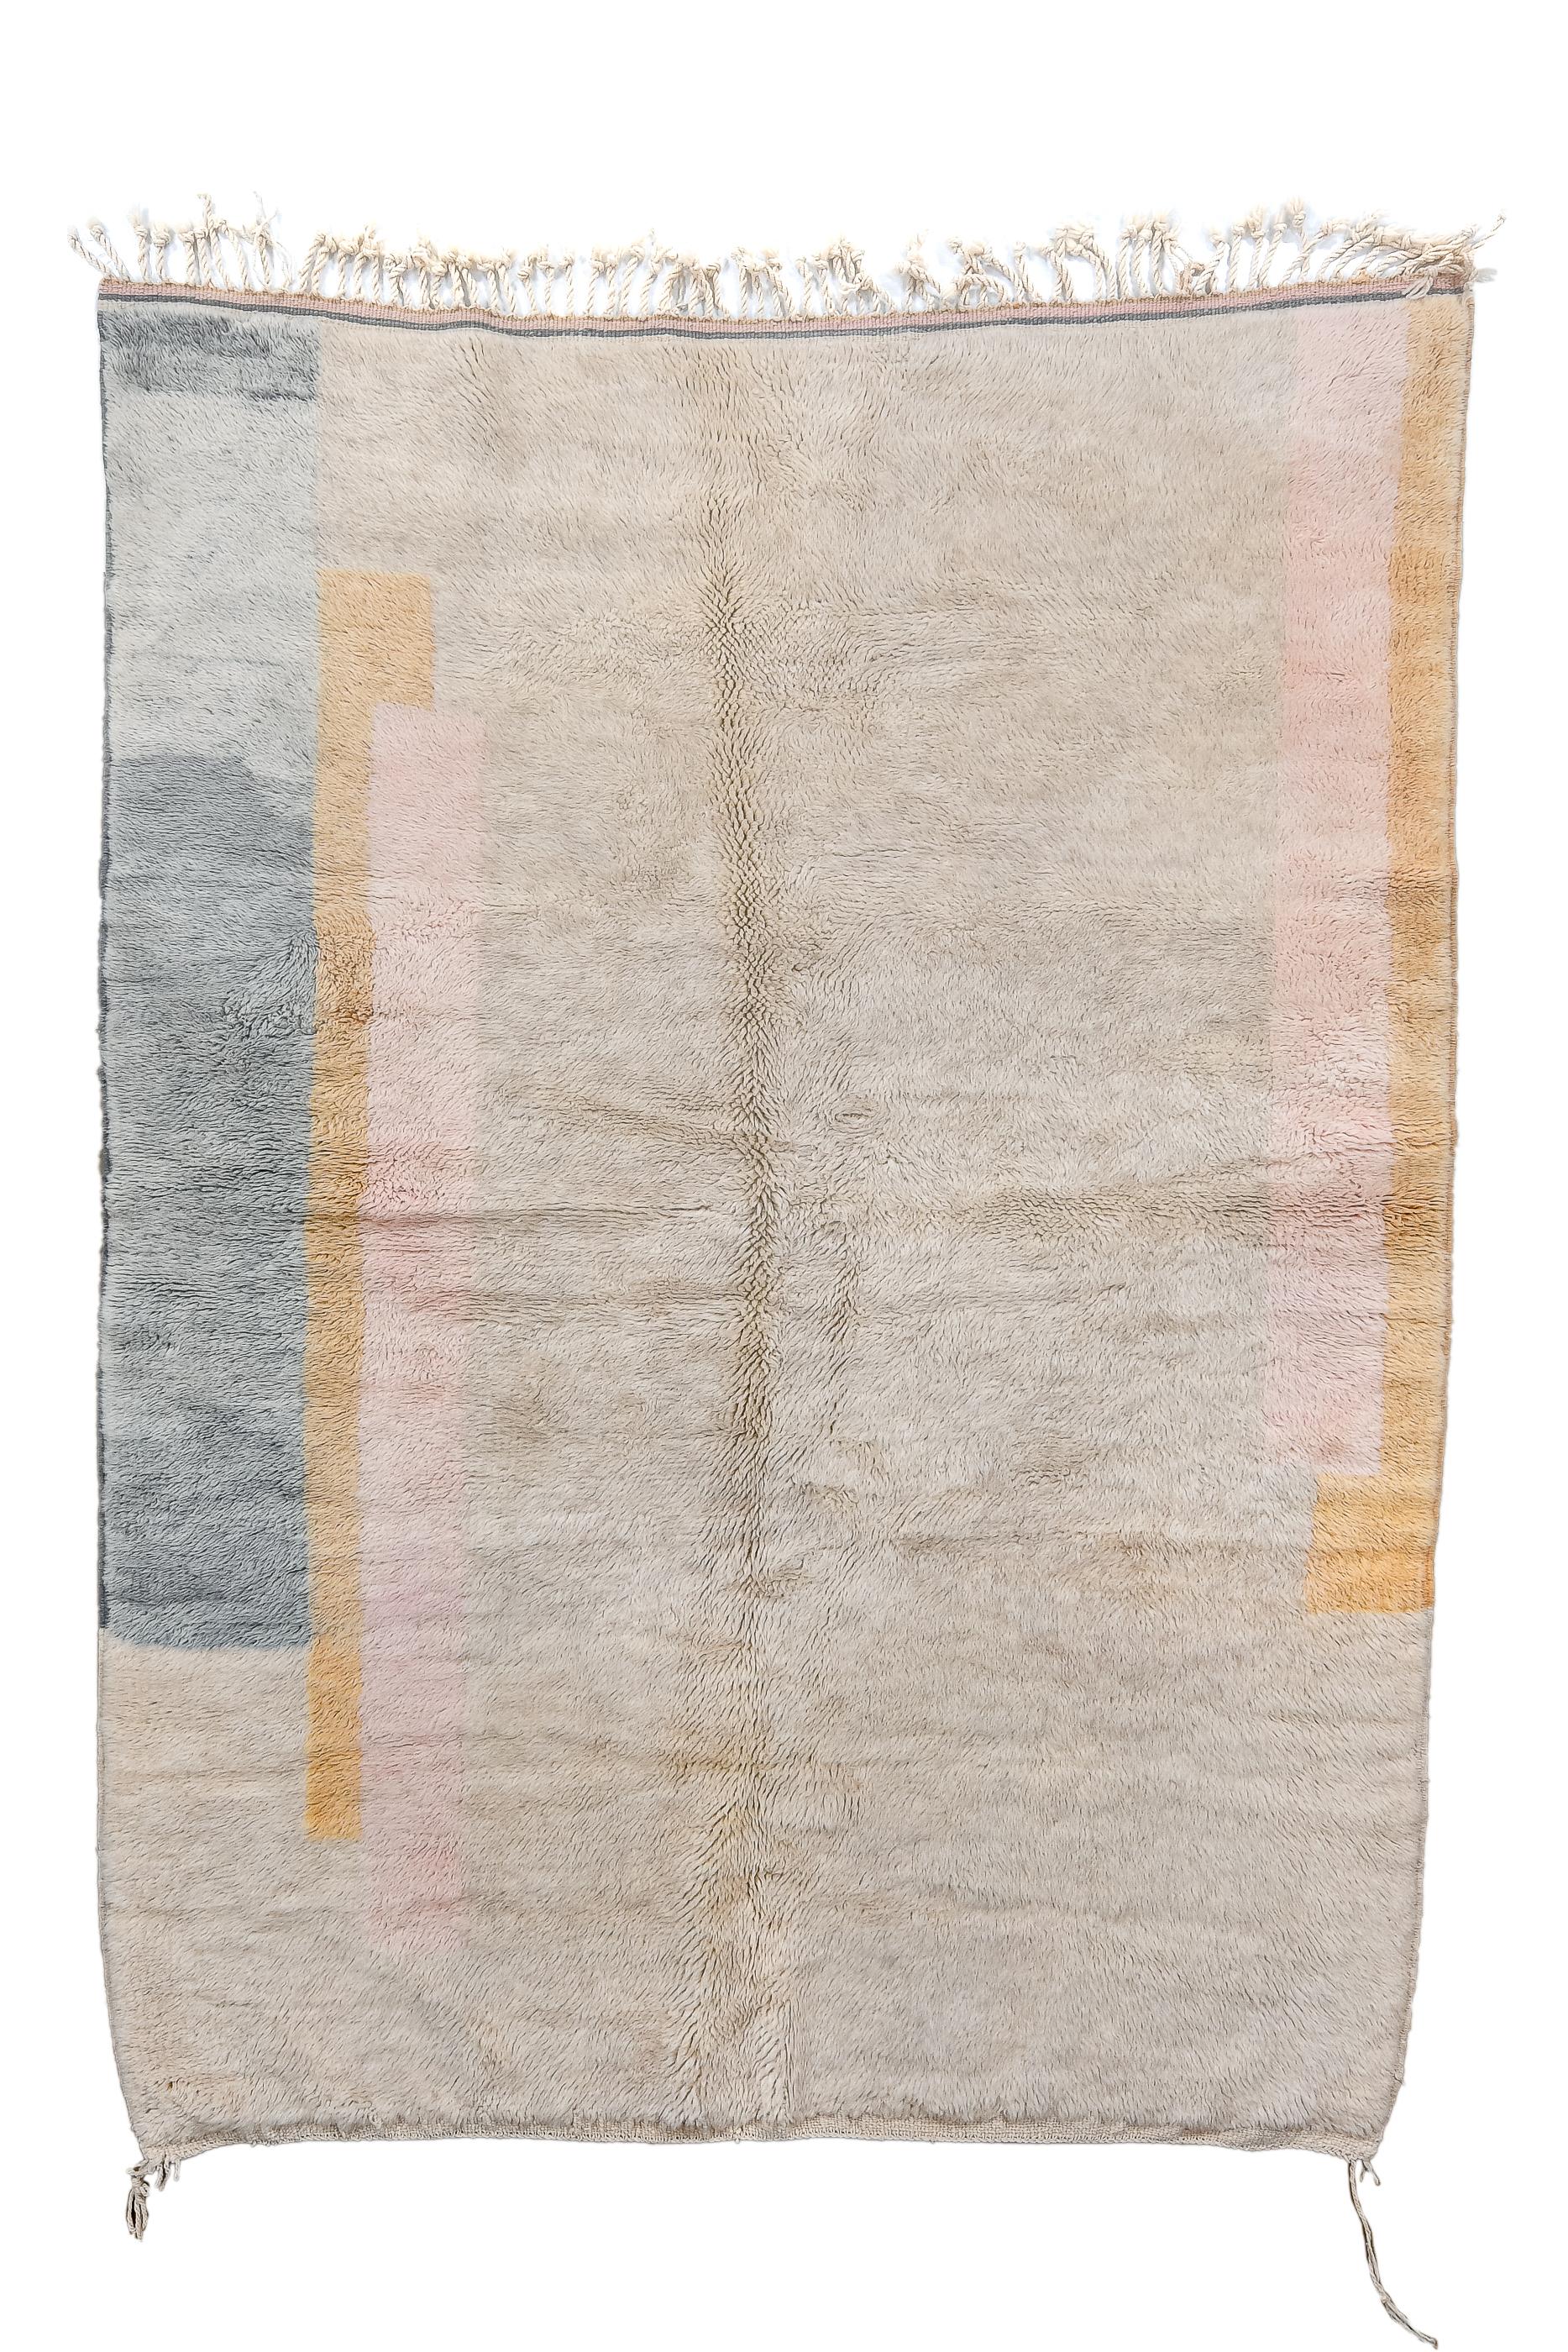 The modernist, abstract rug shows a predominantly beige field, with a partial side strip in plain old gold, another towards one side similar, and a patch of blue-grey alongside it.  Flatwoven ends, including one with tassels. Good condition, coarse